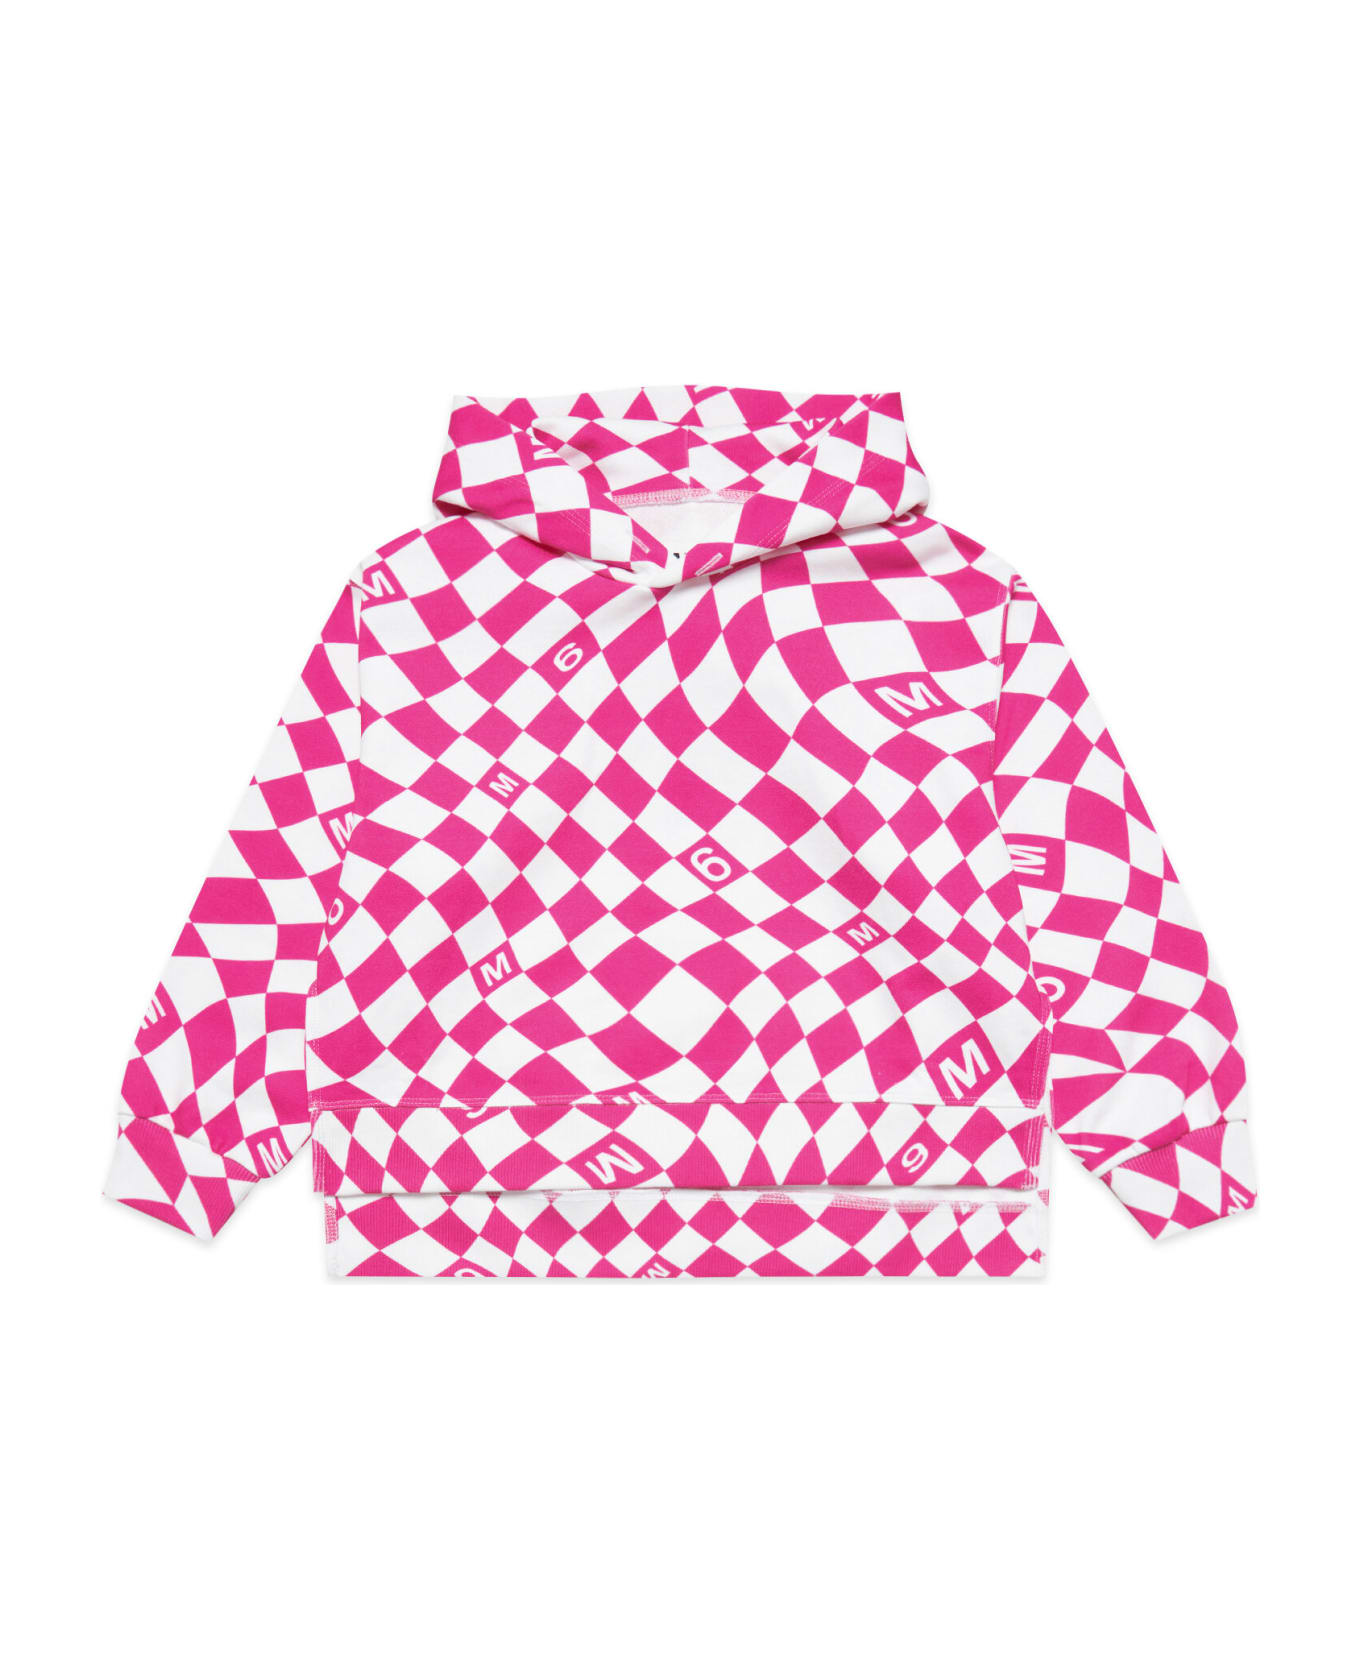 MM6 Maison Margiela Mm6s52u Sweat-shirt Maison Margiela White And Pink Cotton Hoodie With Chequered Pattern - White/super pink